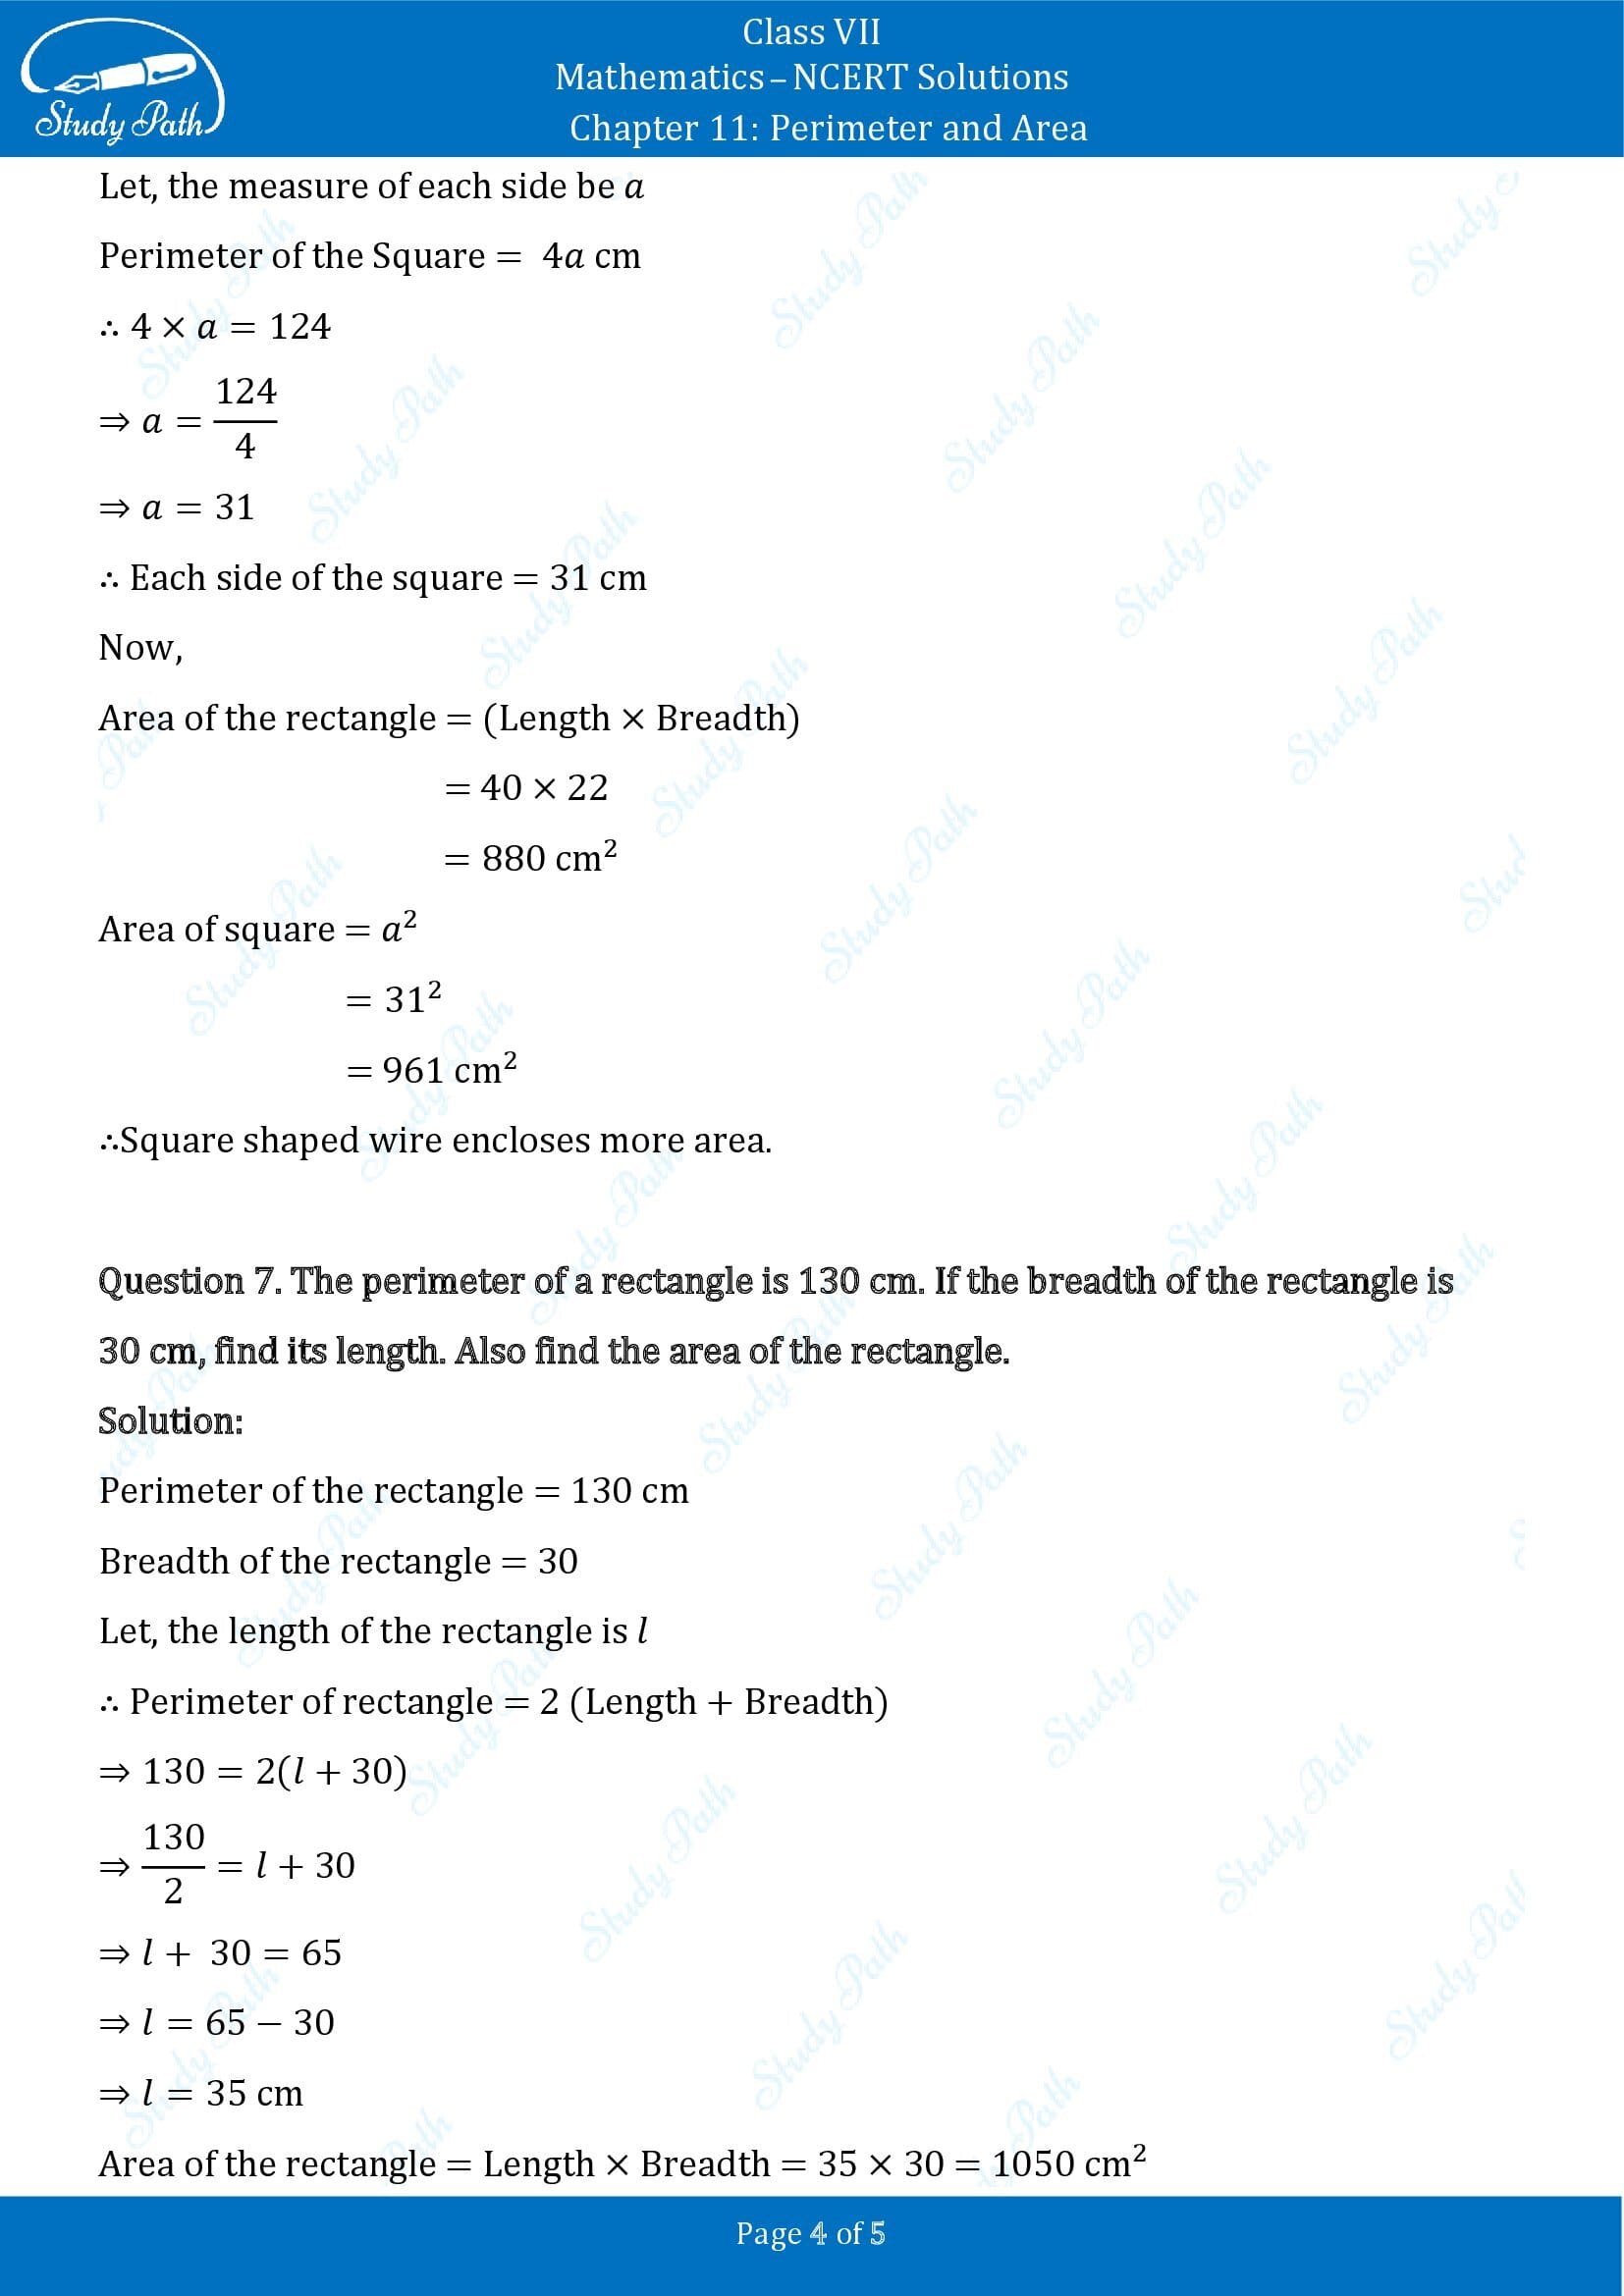 NCERT Solutions for Class 7 Maths Chapter 11 Perimeter and Area Exercise 11.1 00004